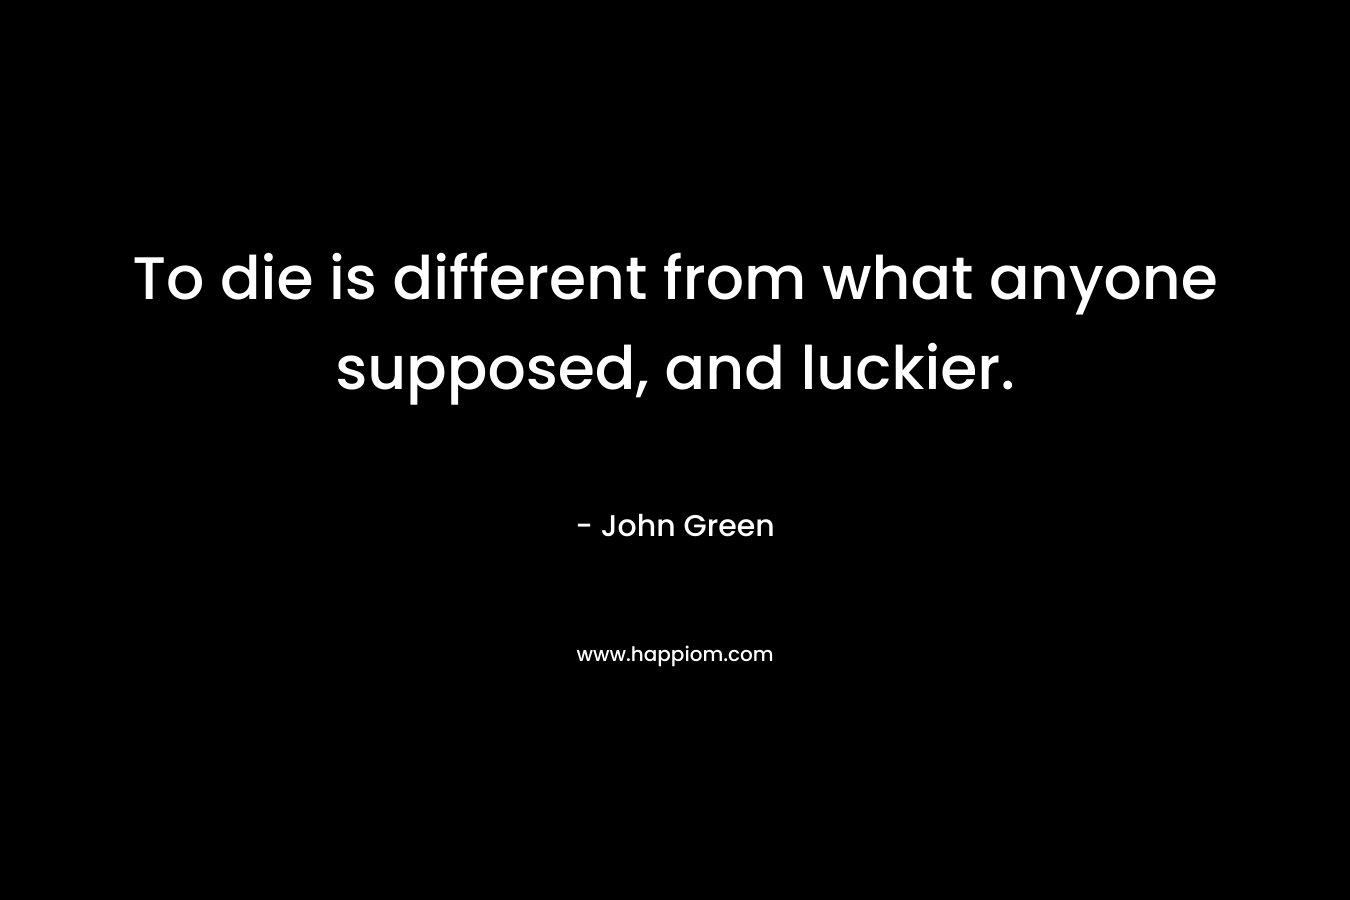 To die is different from what anyone supposed, and luckier. – John Green